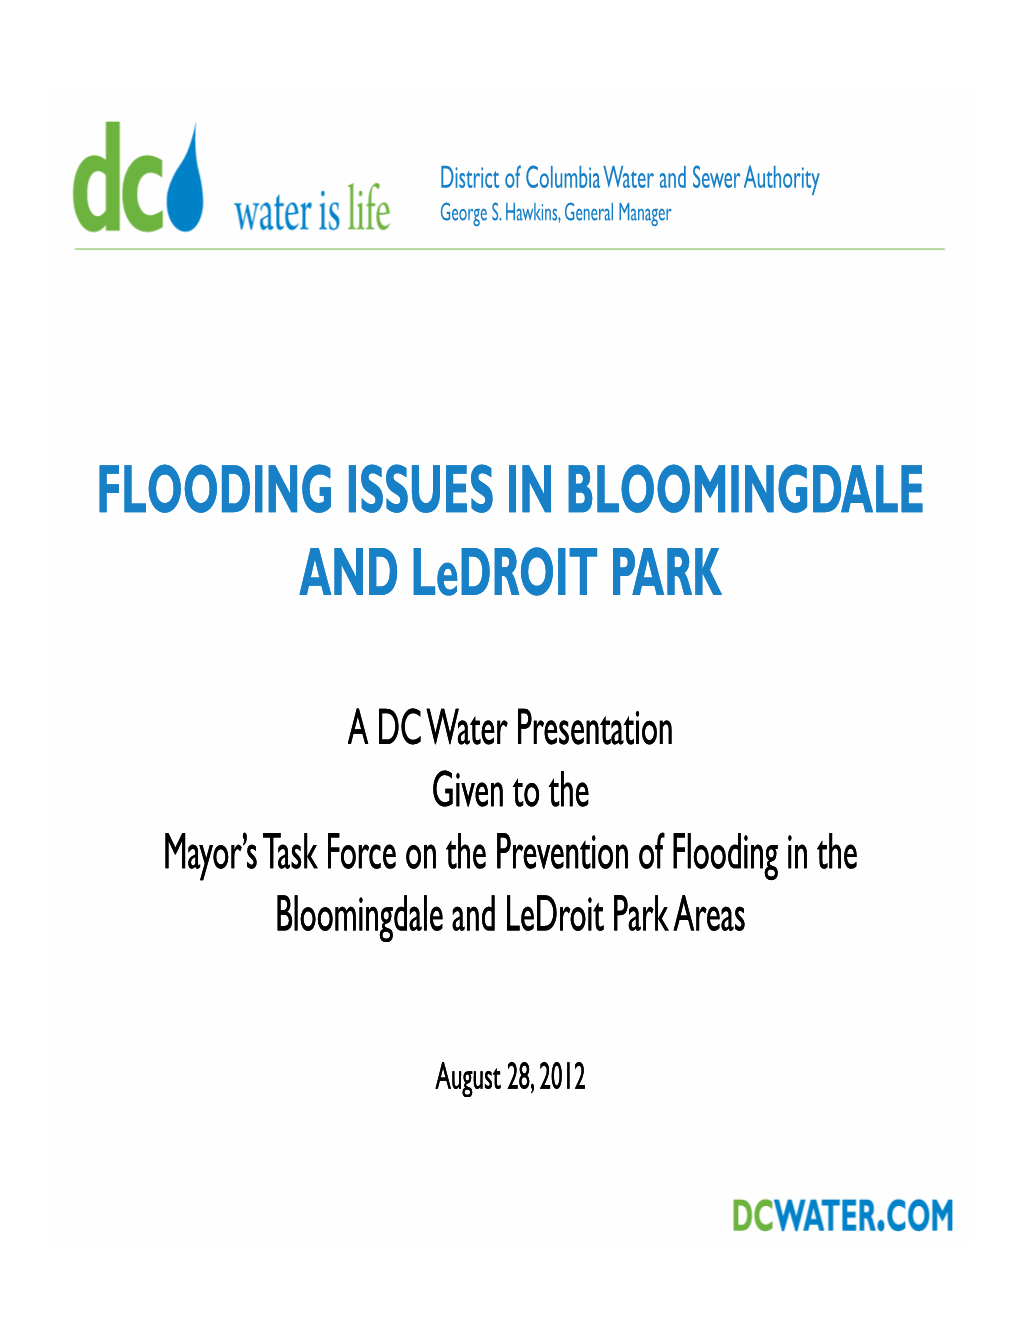 FLOODING ISSUES in BLOOMINGDALE and Ledroit PARK